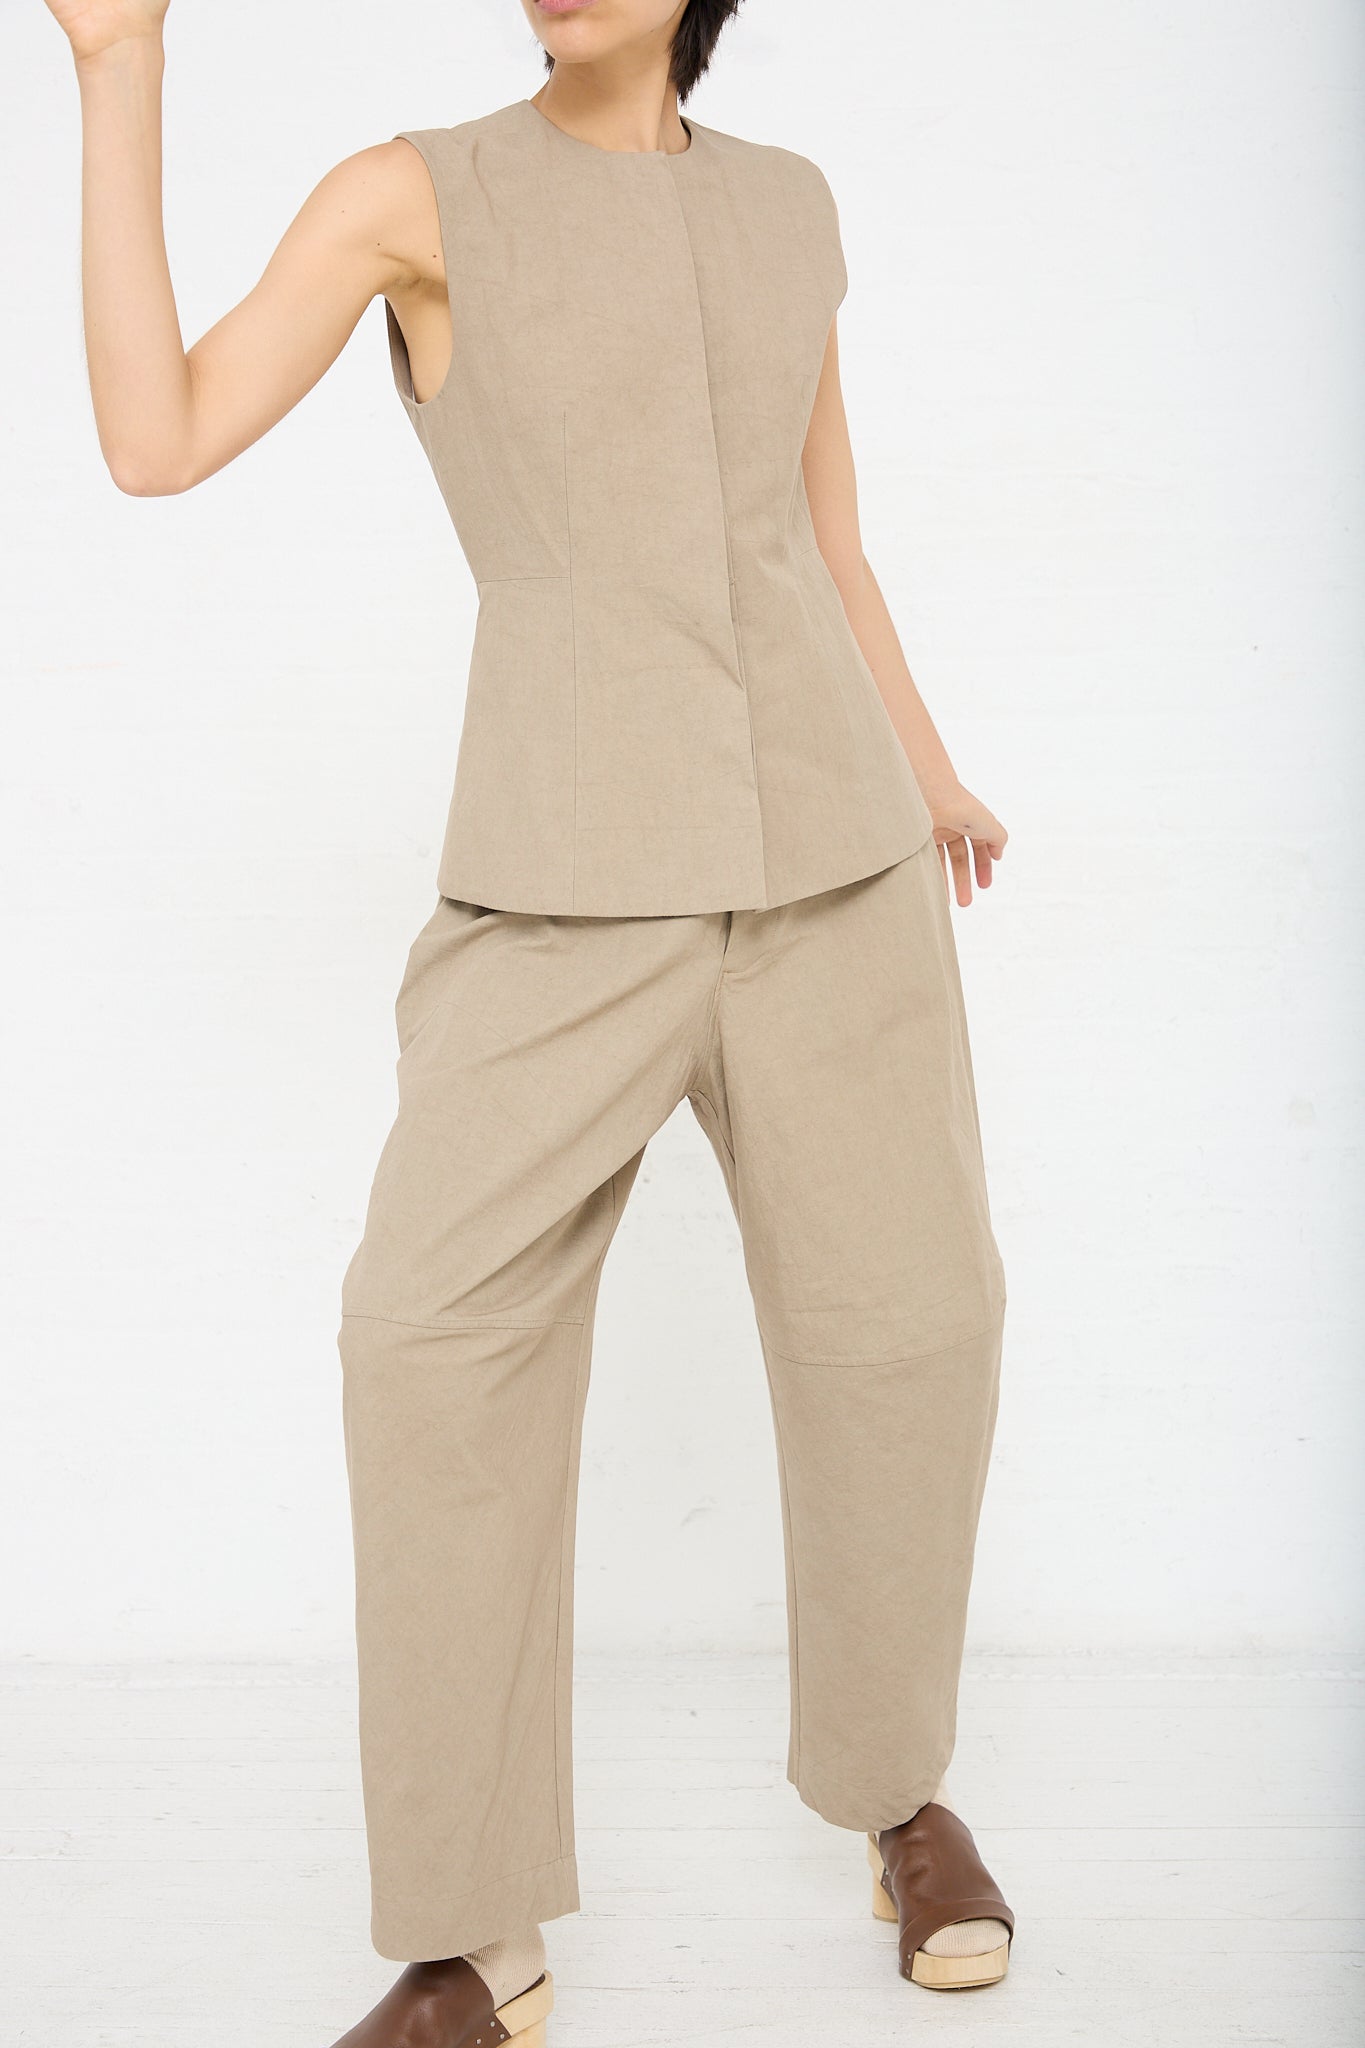 A woman wearing a sleeveless Structure Bodice in Drab (Olive Brown) jumpsuit made of cotton and sandals.